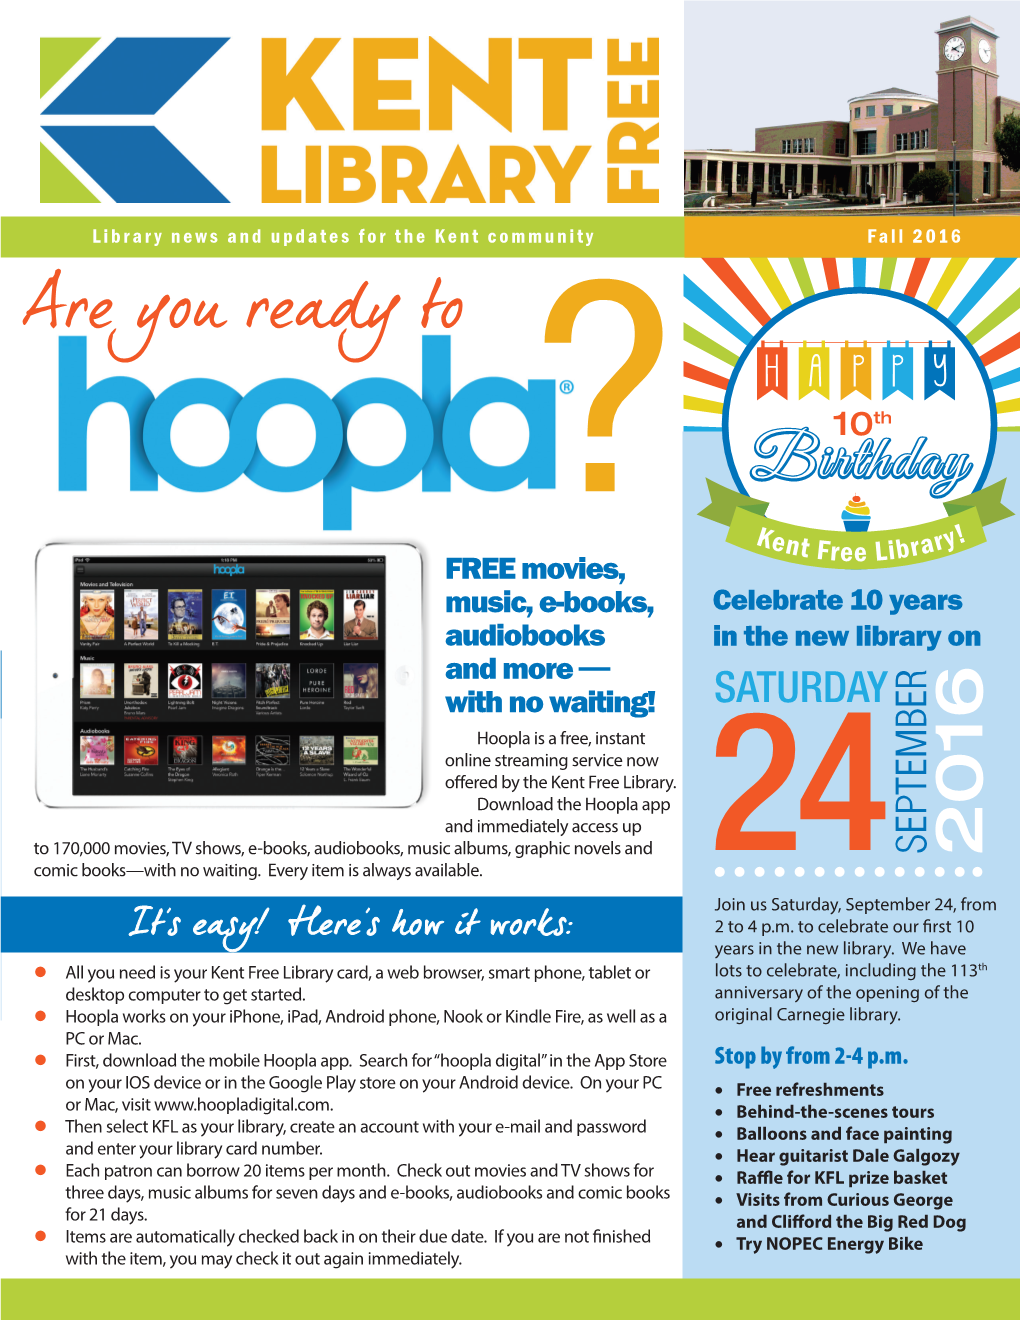 Free Movies, Music, E-Books, Audiobooks and More — with No Waiting! Hoopla Is a Free, Instant Online Streaming Service Now Offered by the Kent Free Library